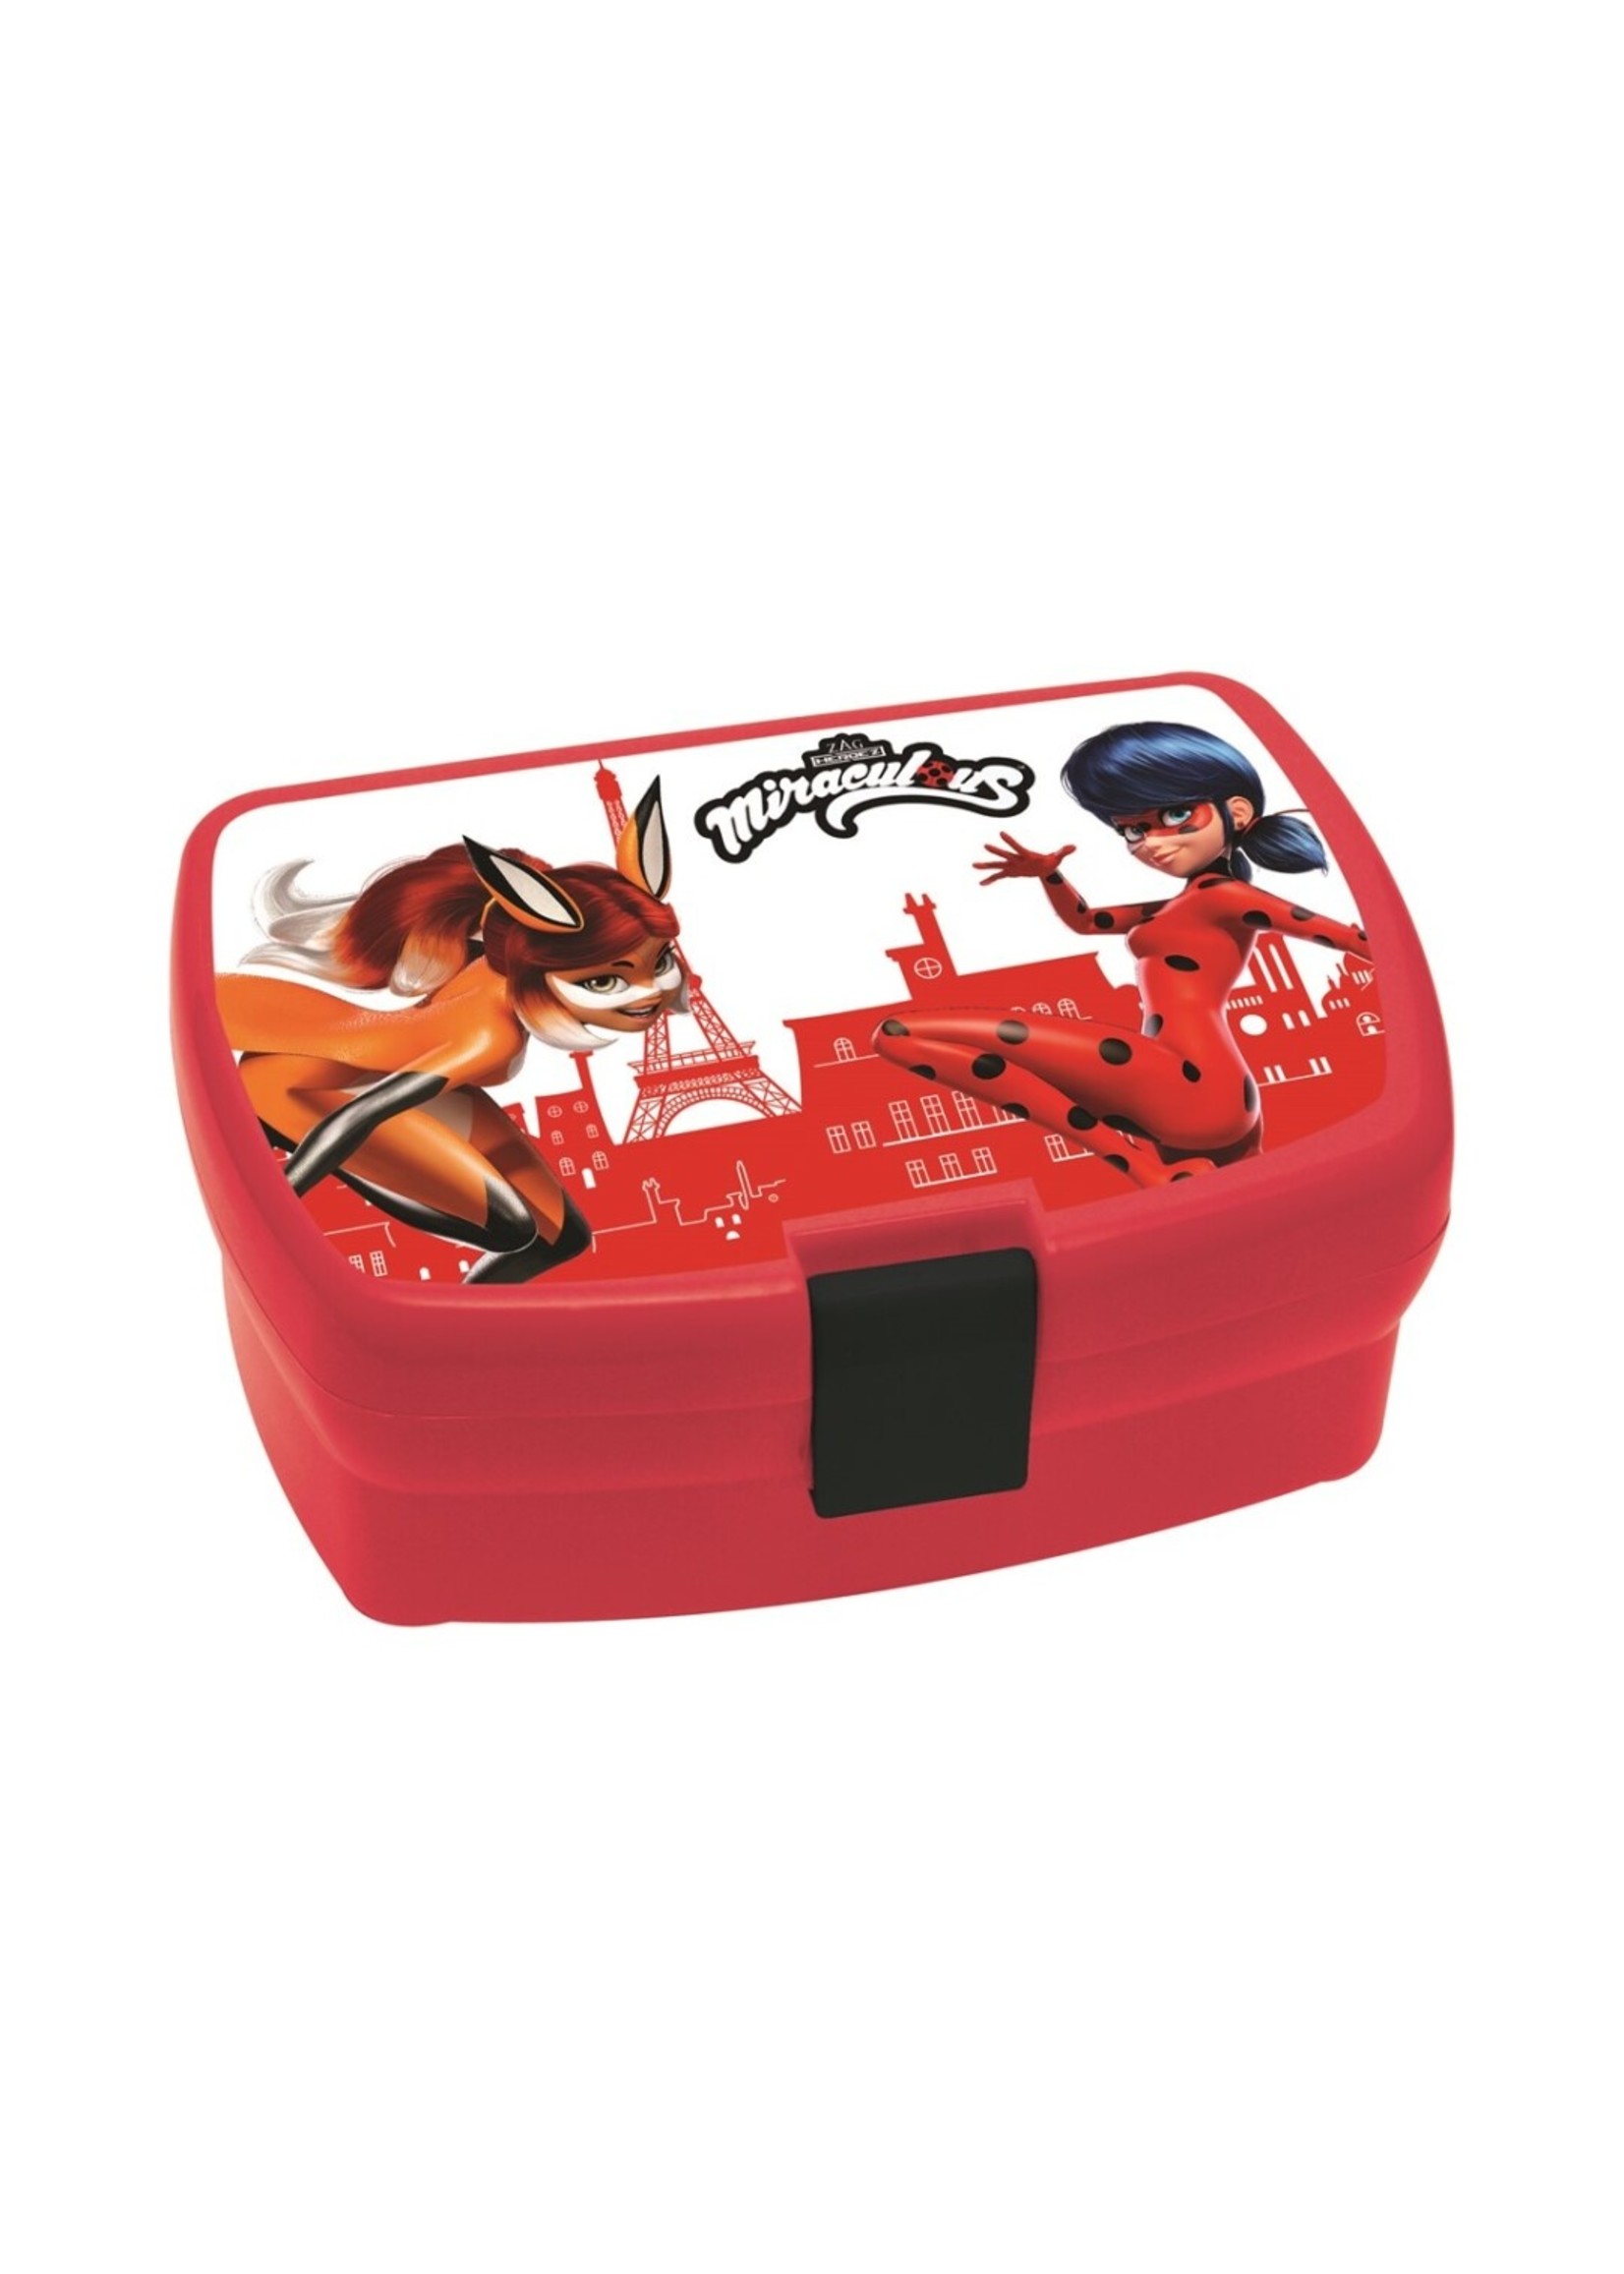 Miraculous Ladybug lunch box from Miraculous red